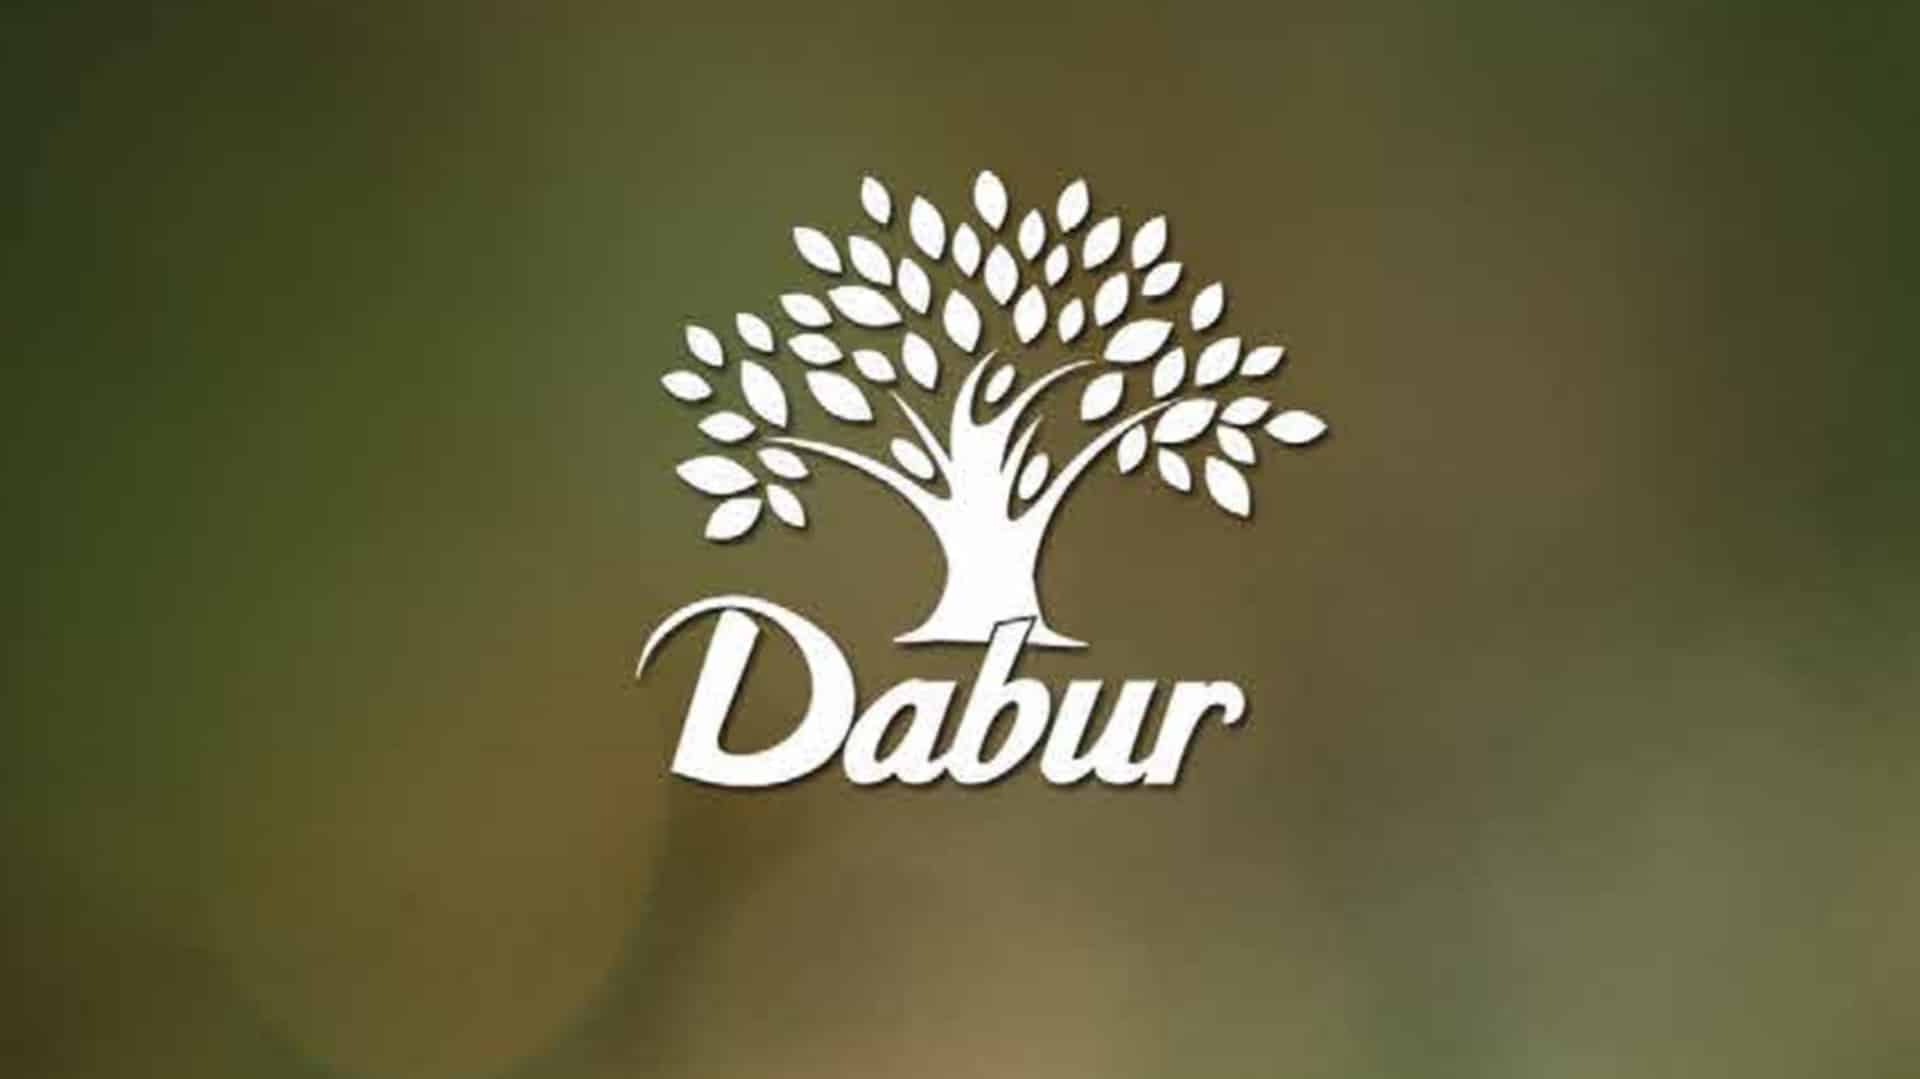 Dabur becomes India's first 'plastic waste neutral' FMCG company